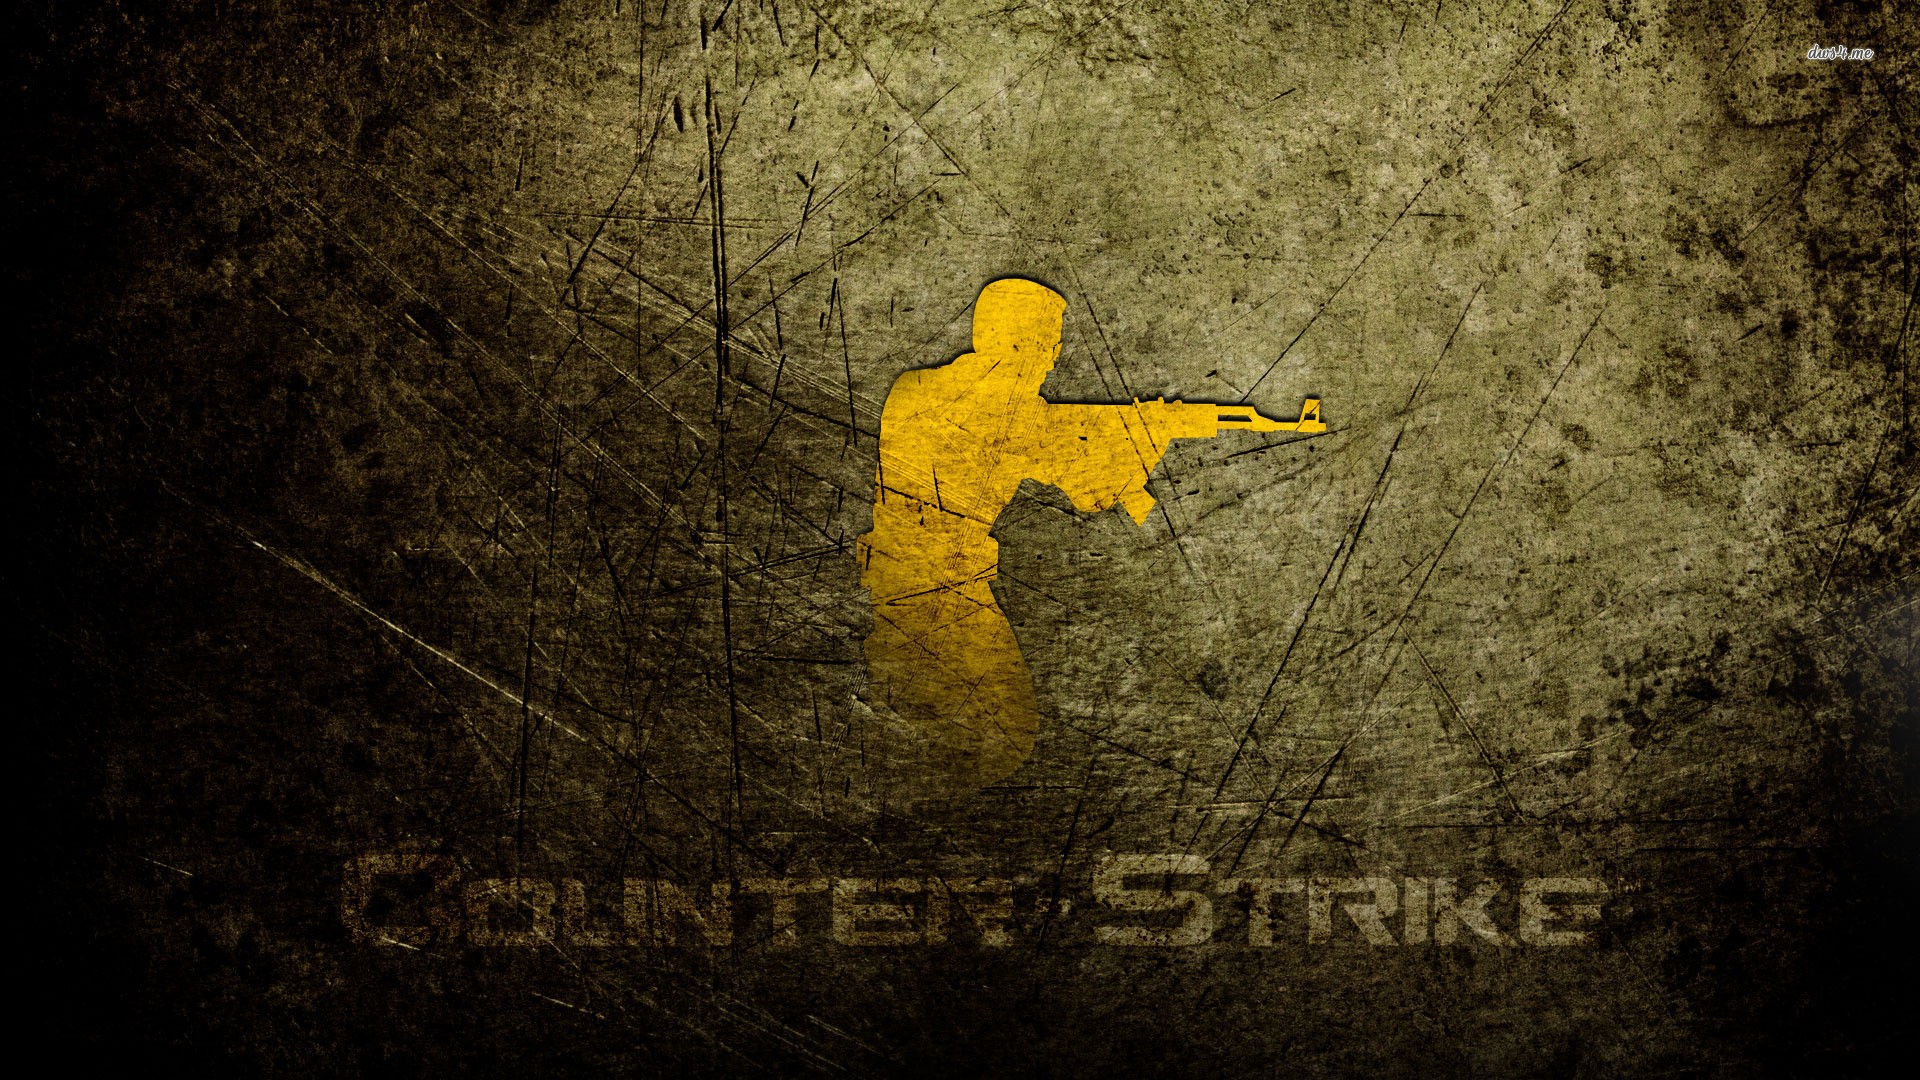 General 1920x1080 Counter-Strike: Global Offensive Counter-Strike video games grunge yellow PC gaming